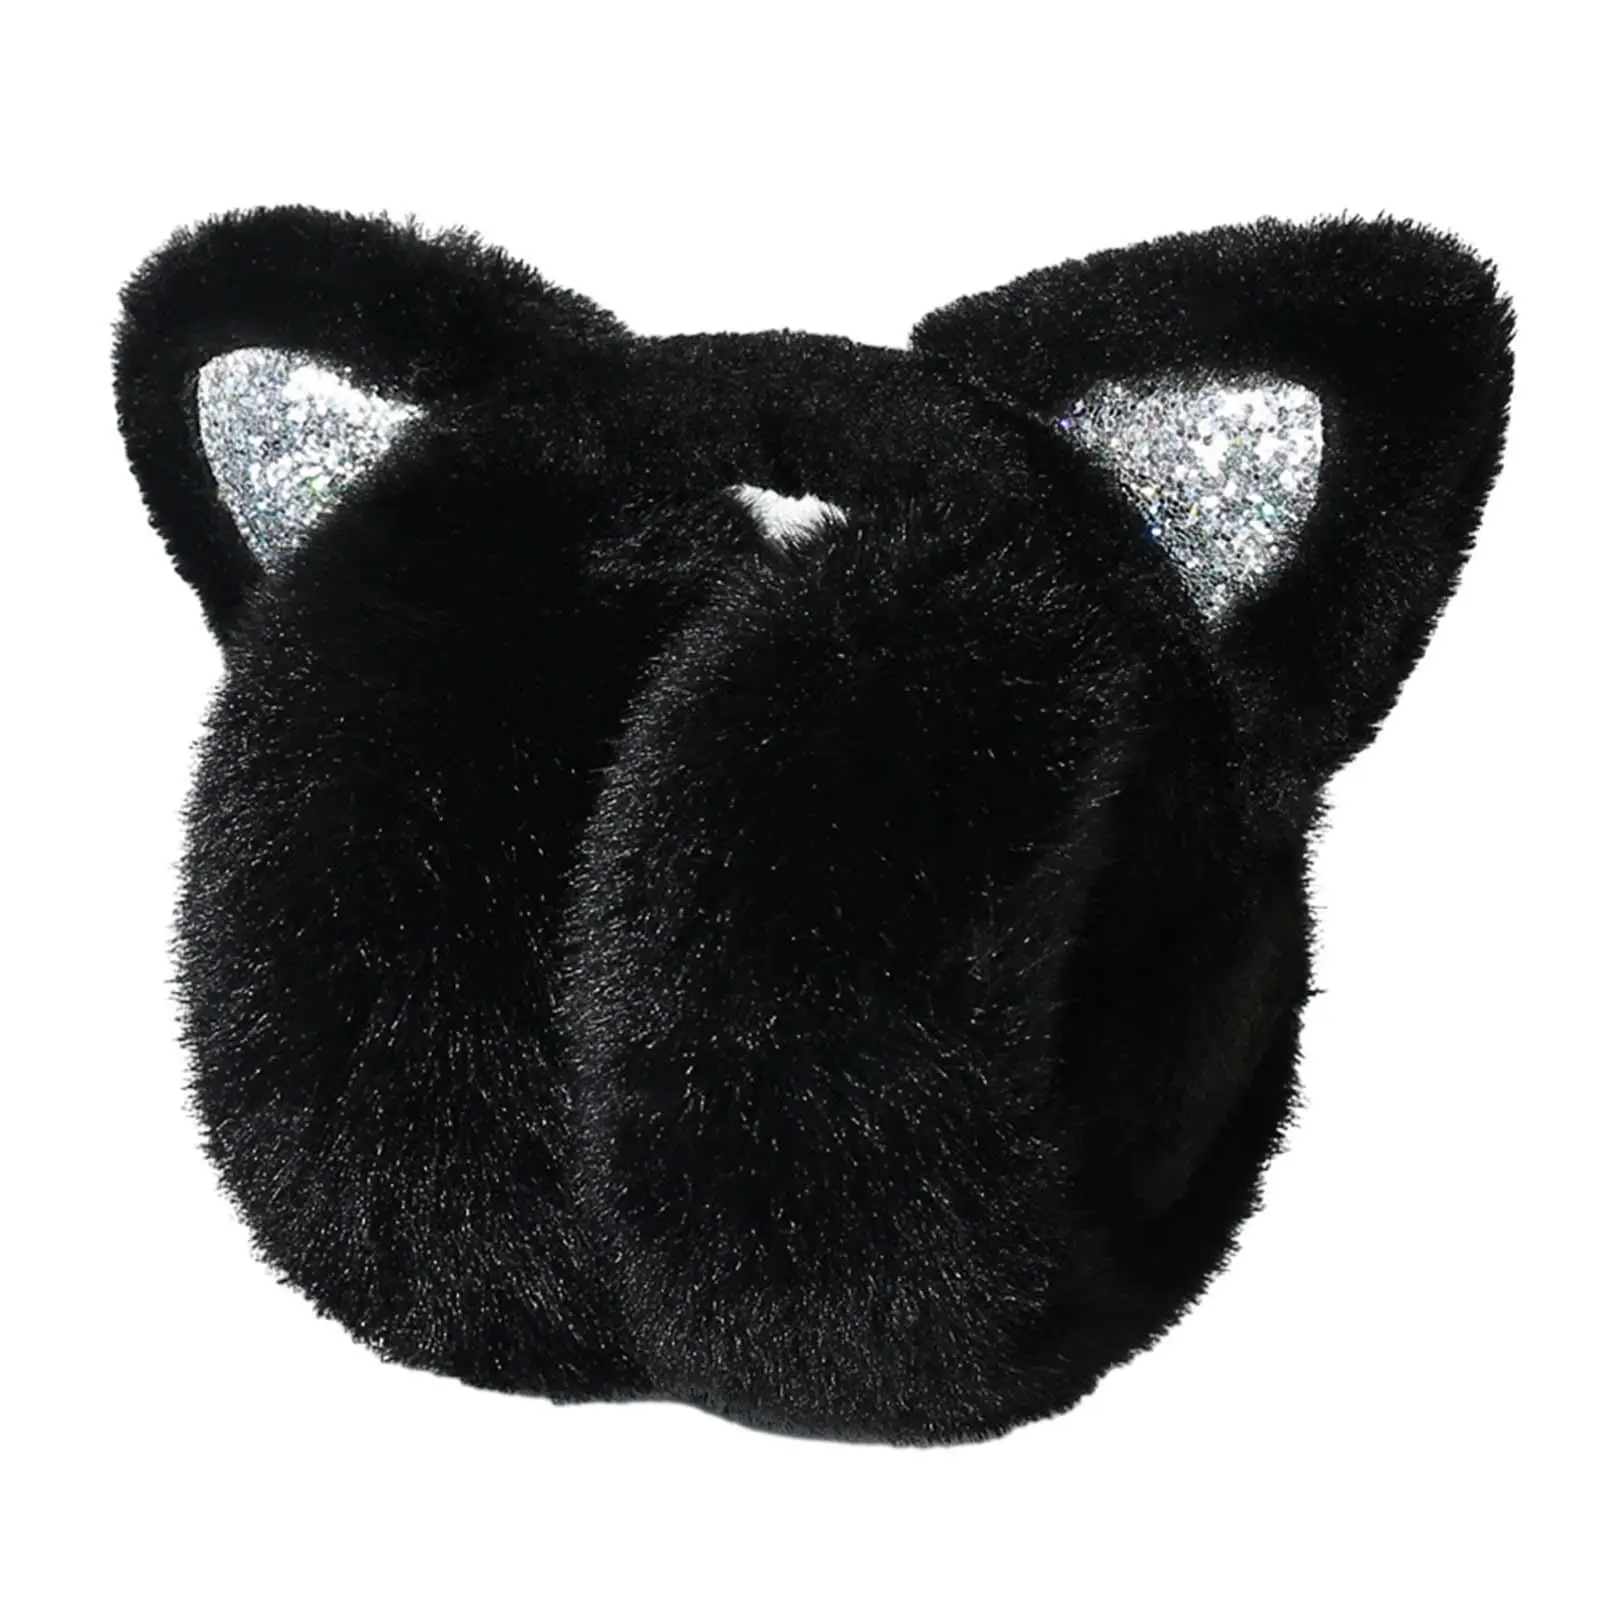 Earmuffs Soft Warm Polyester Premium Foldable Winter Ear Muffs Ear Warmers Ear Cover for Outdoor Skiing Skating Traveling Riding